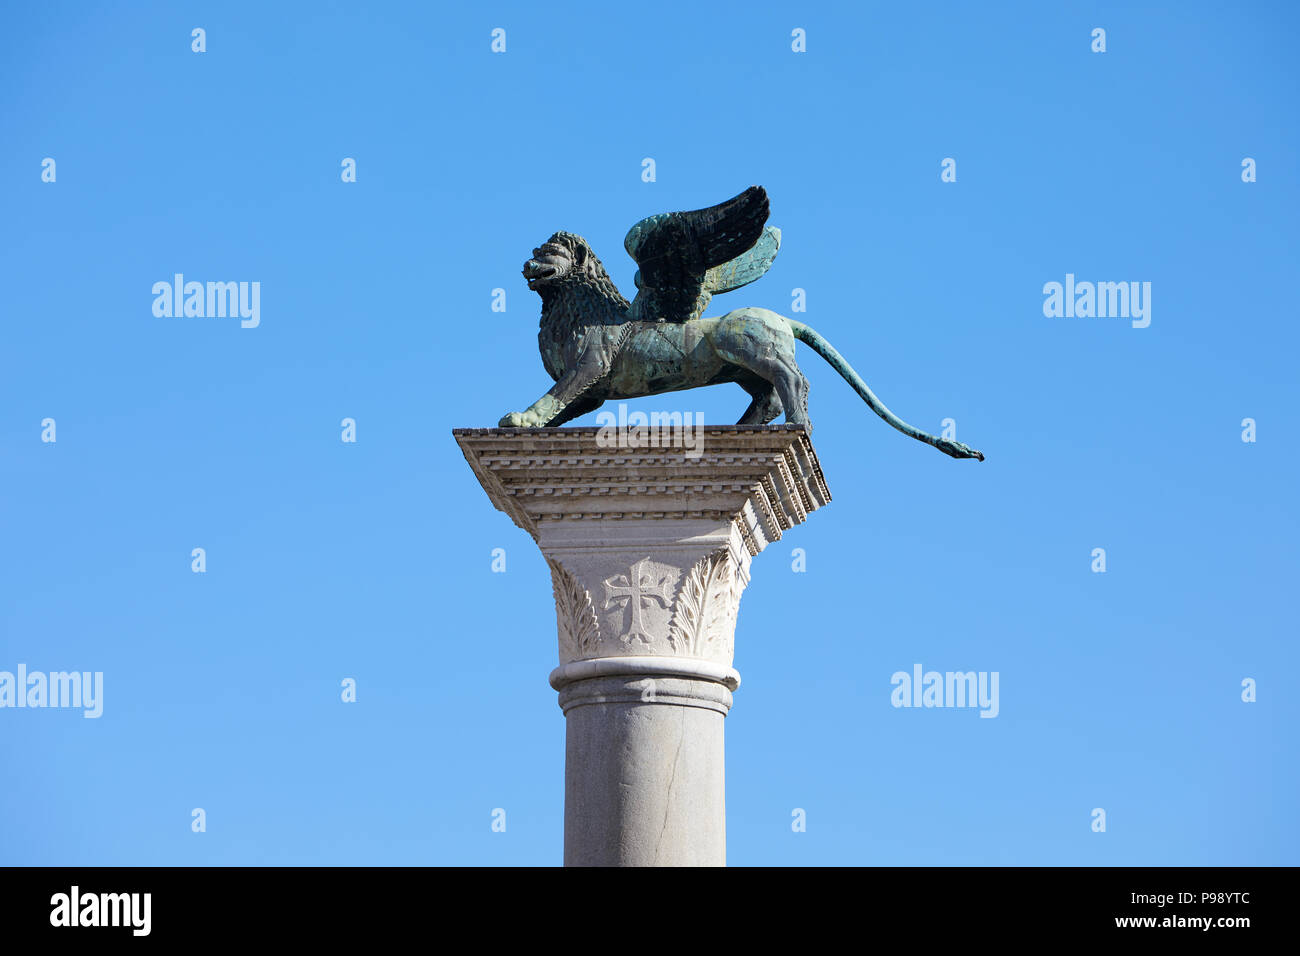 Winged Lion statue, symbol of Venice in a sunny day, blue sky in Italy Stock Photo